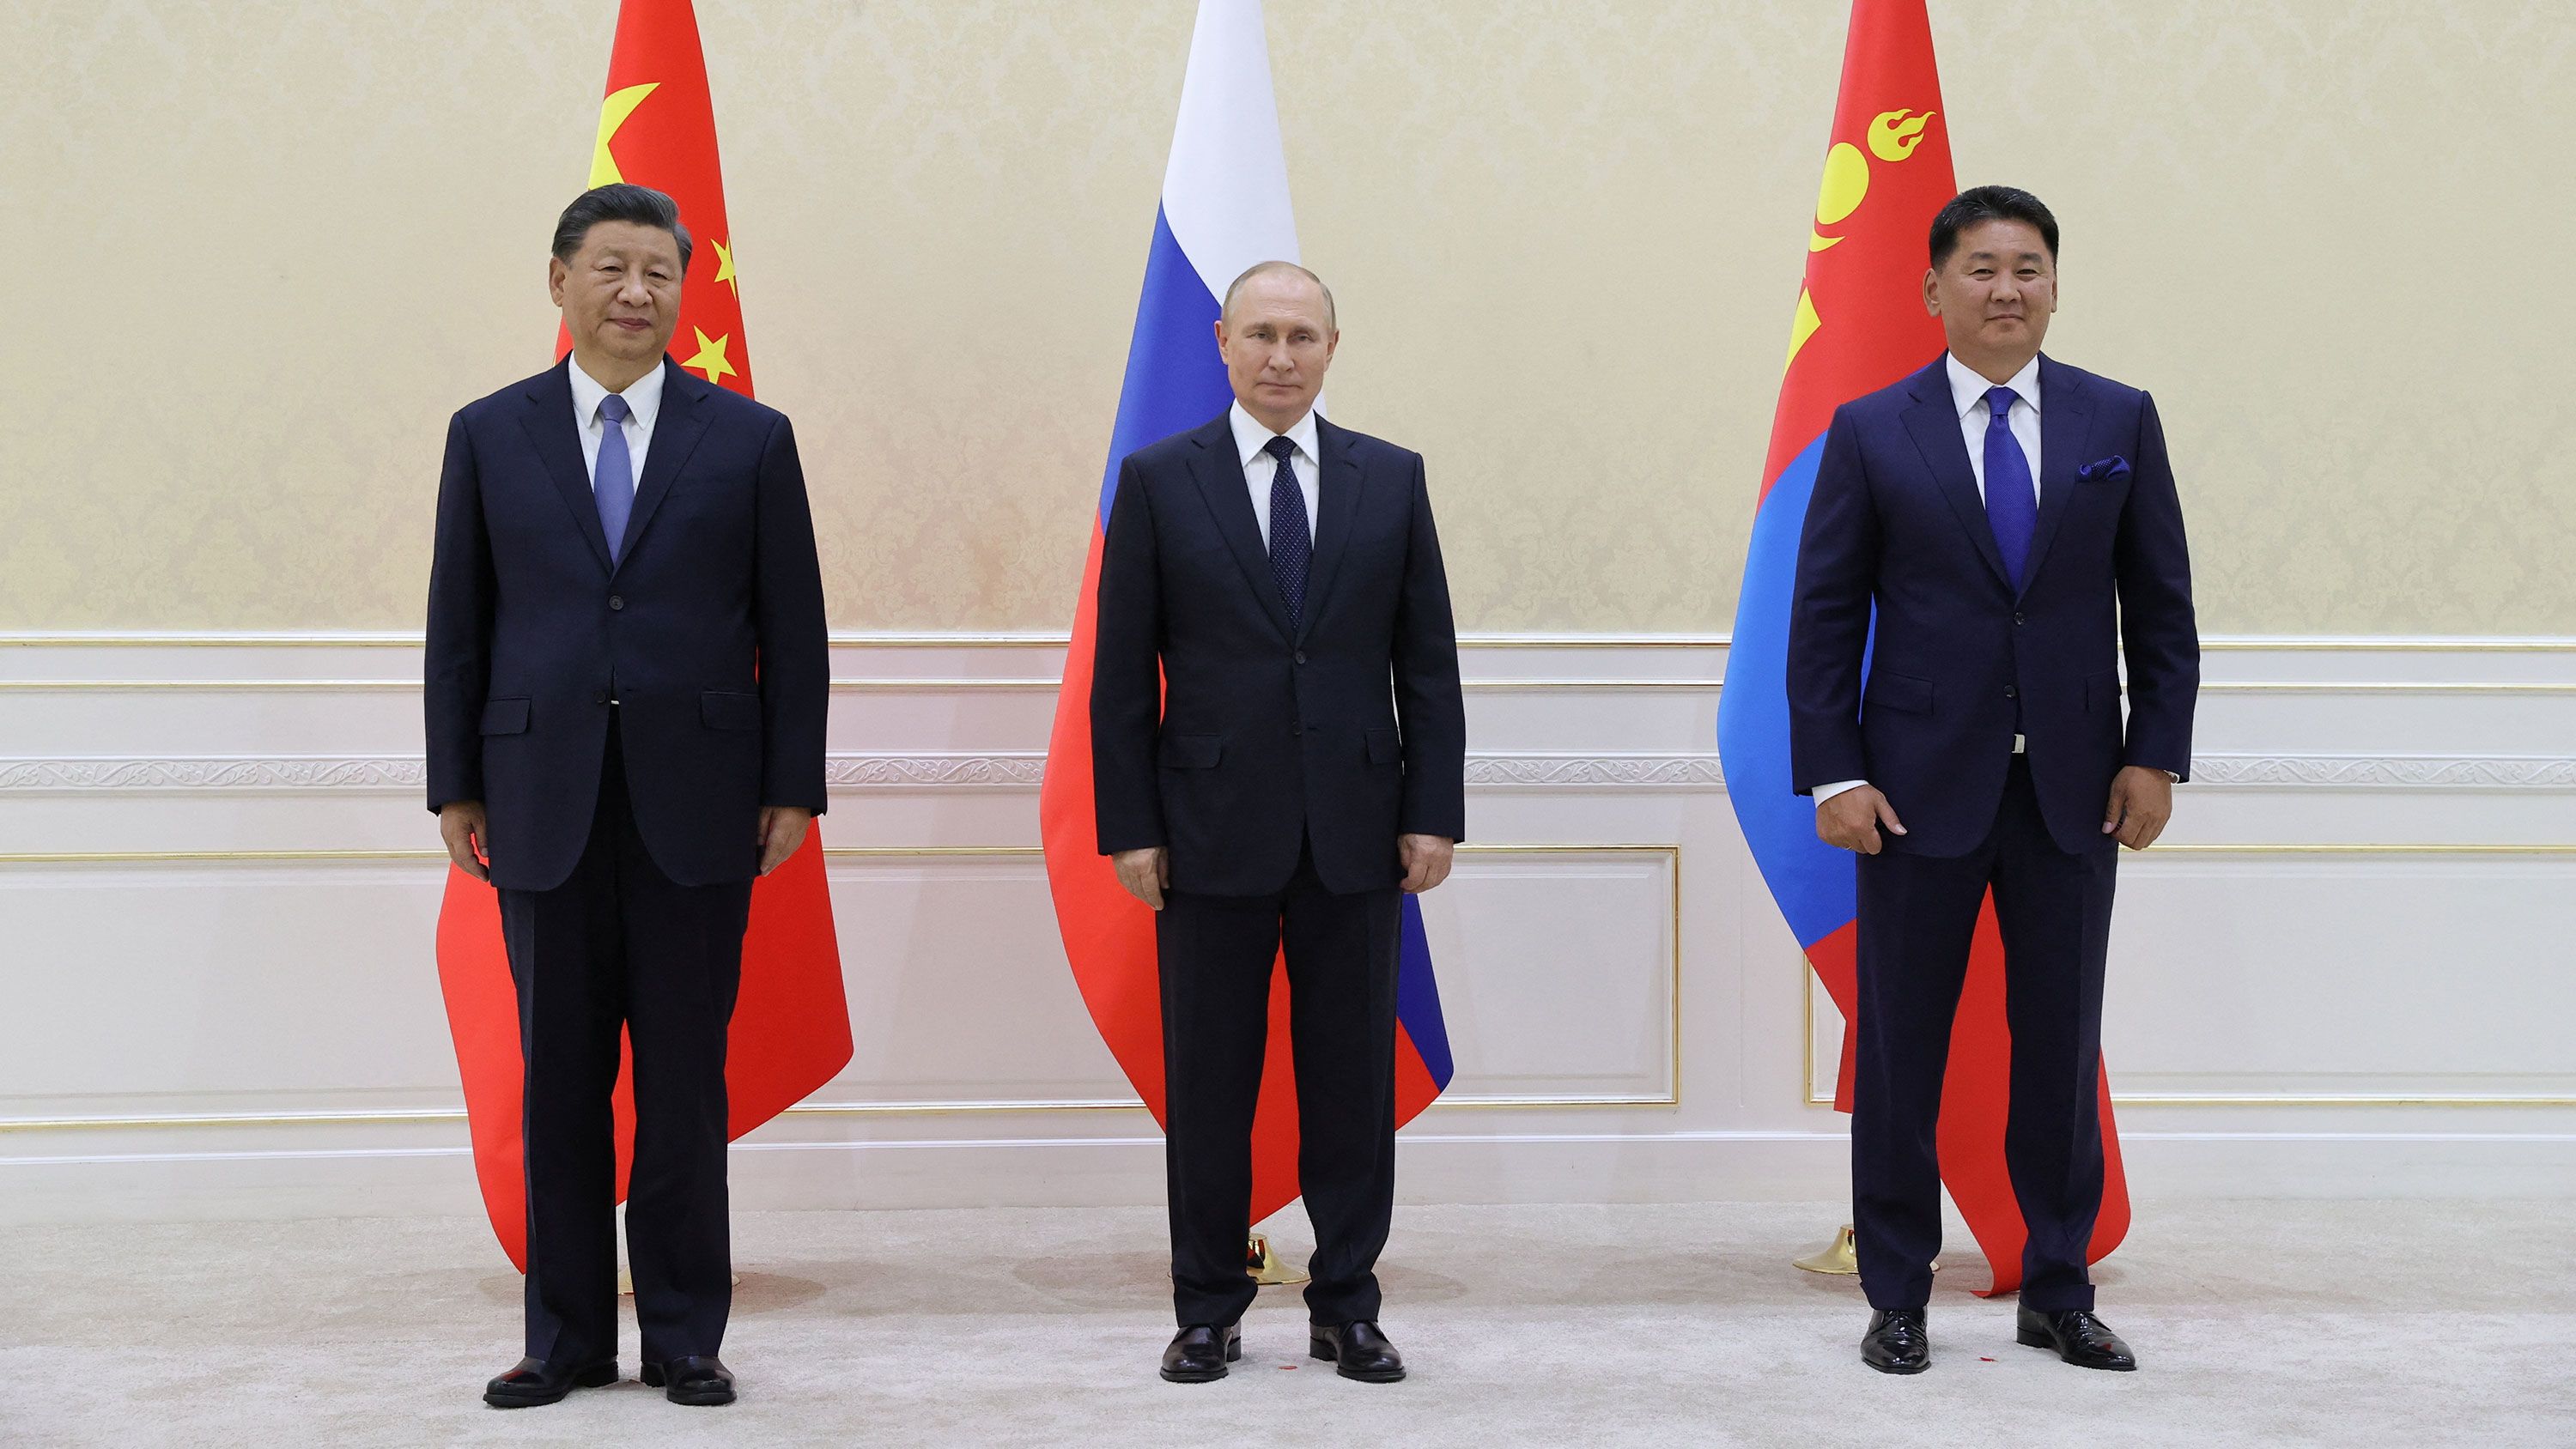 Top Division: China and Russia lead